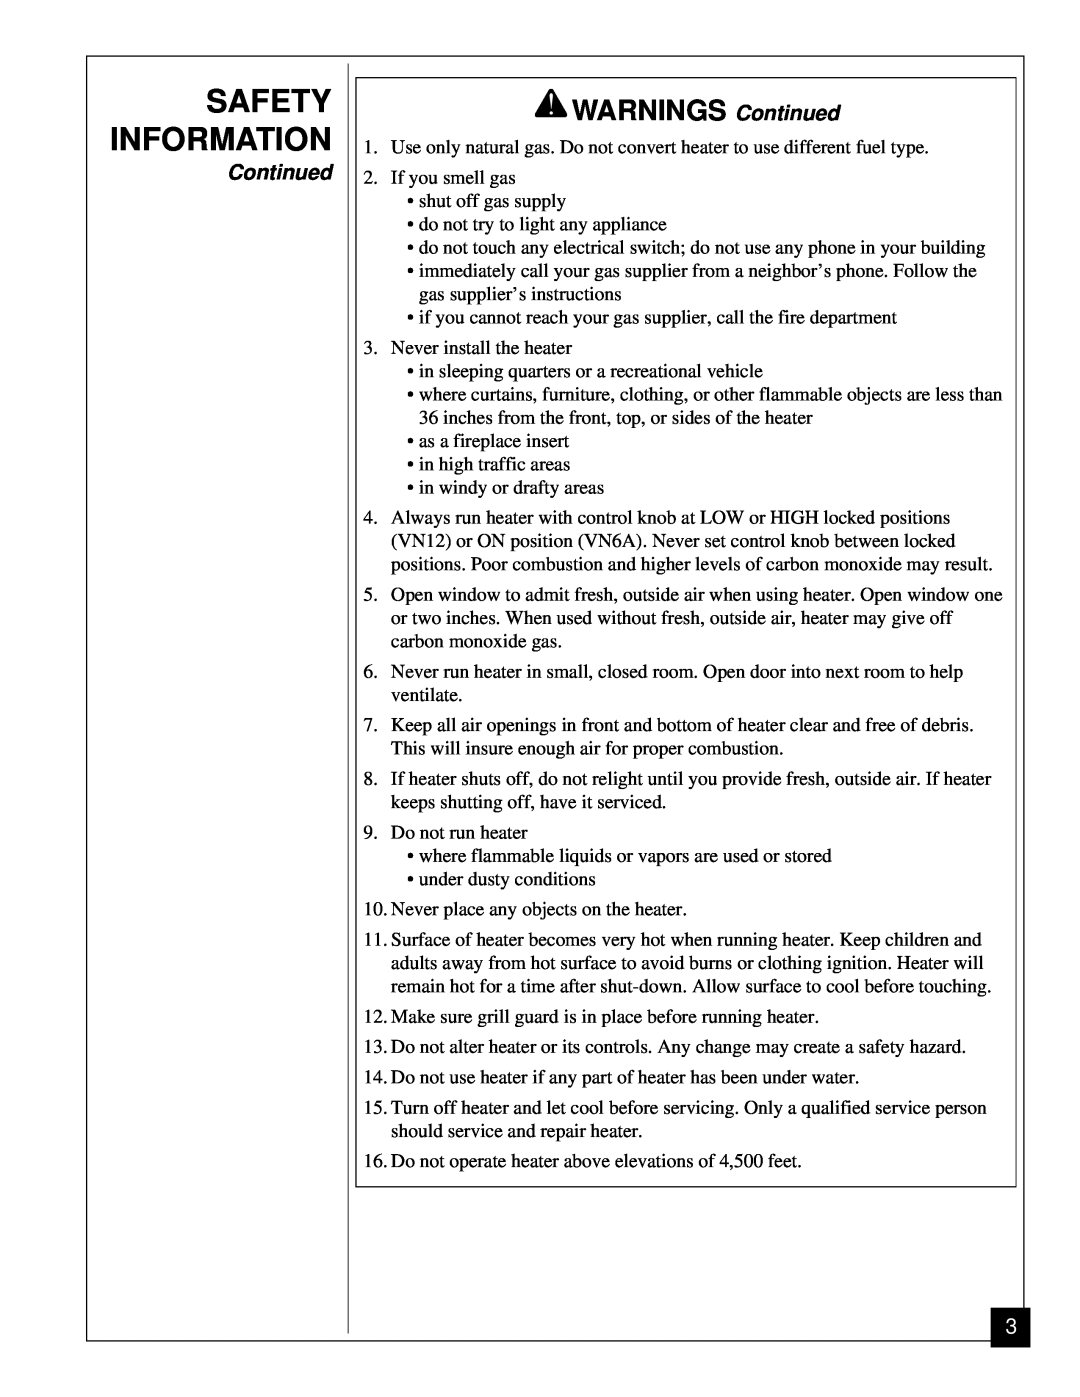 Vanguard Heating VN12, VN6A installation manual Safety Information, WARNINGS Continued 